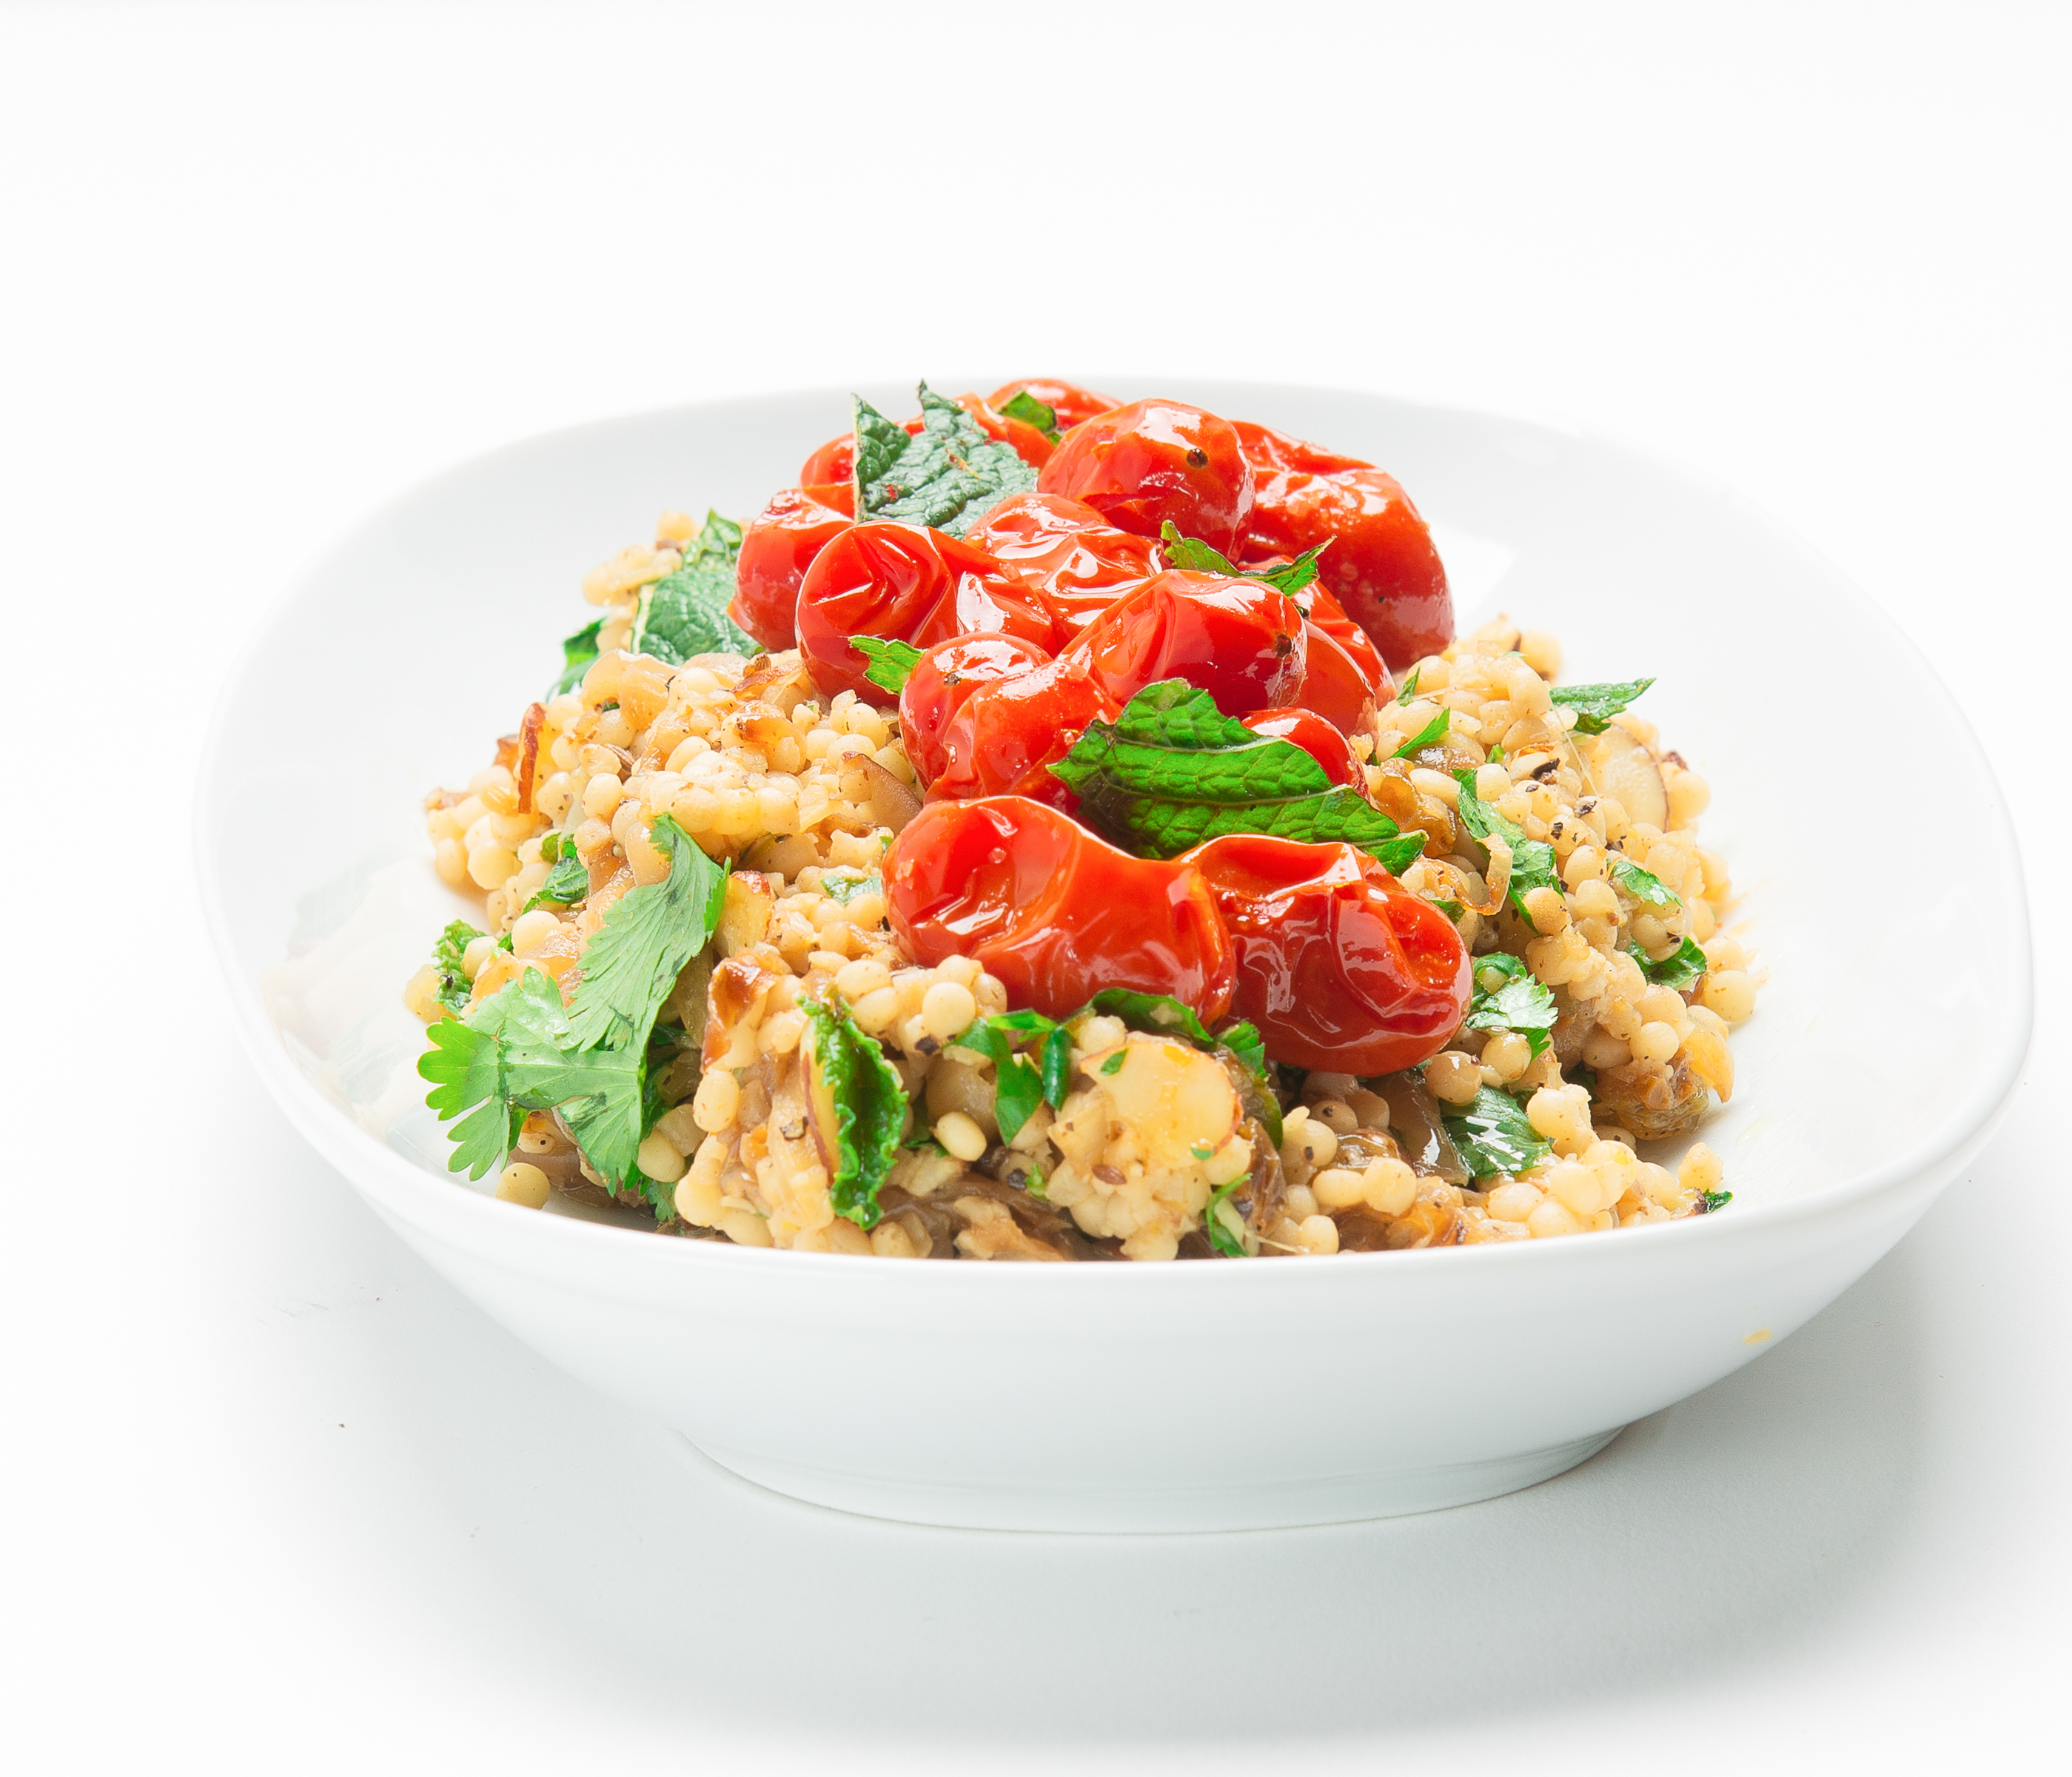 Salad Days! Couscous With Tomatoes and Herbs